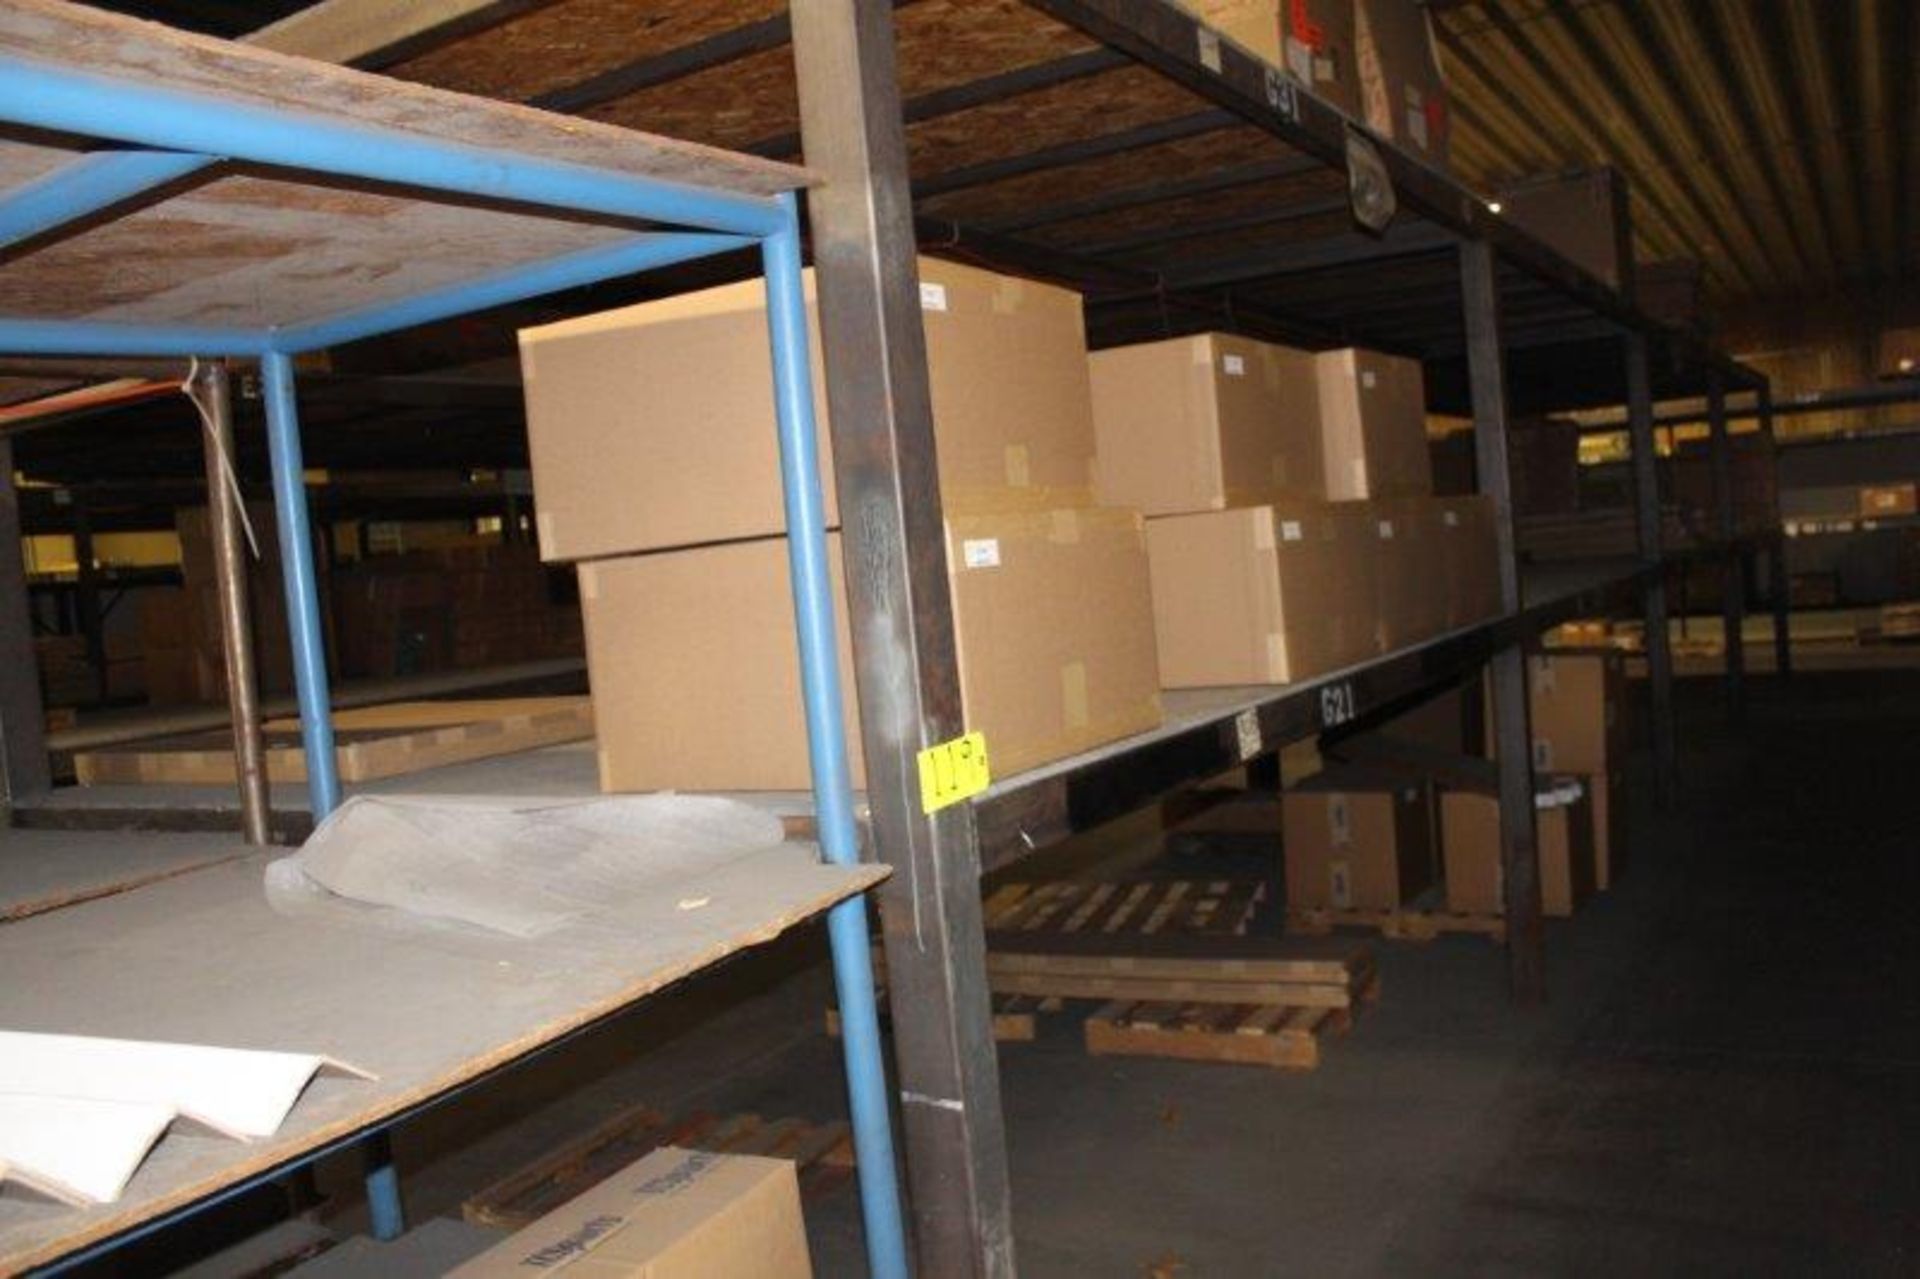 Lot of 2) Sections Fabricated Steel Racking, (Inventory Not Included)